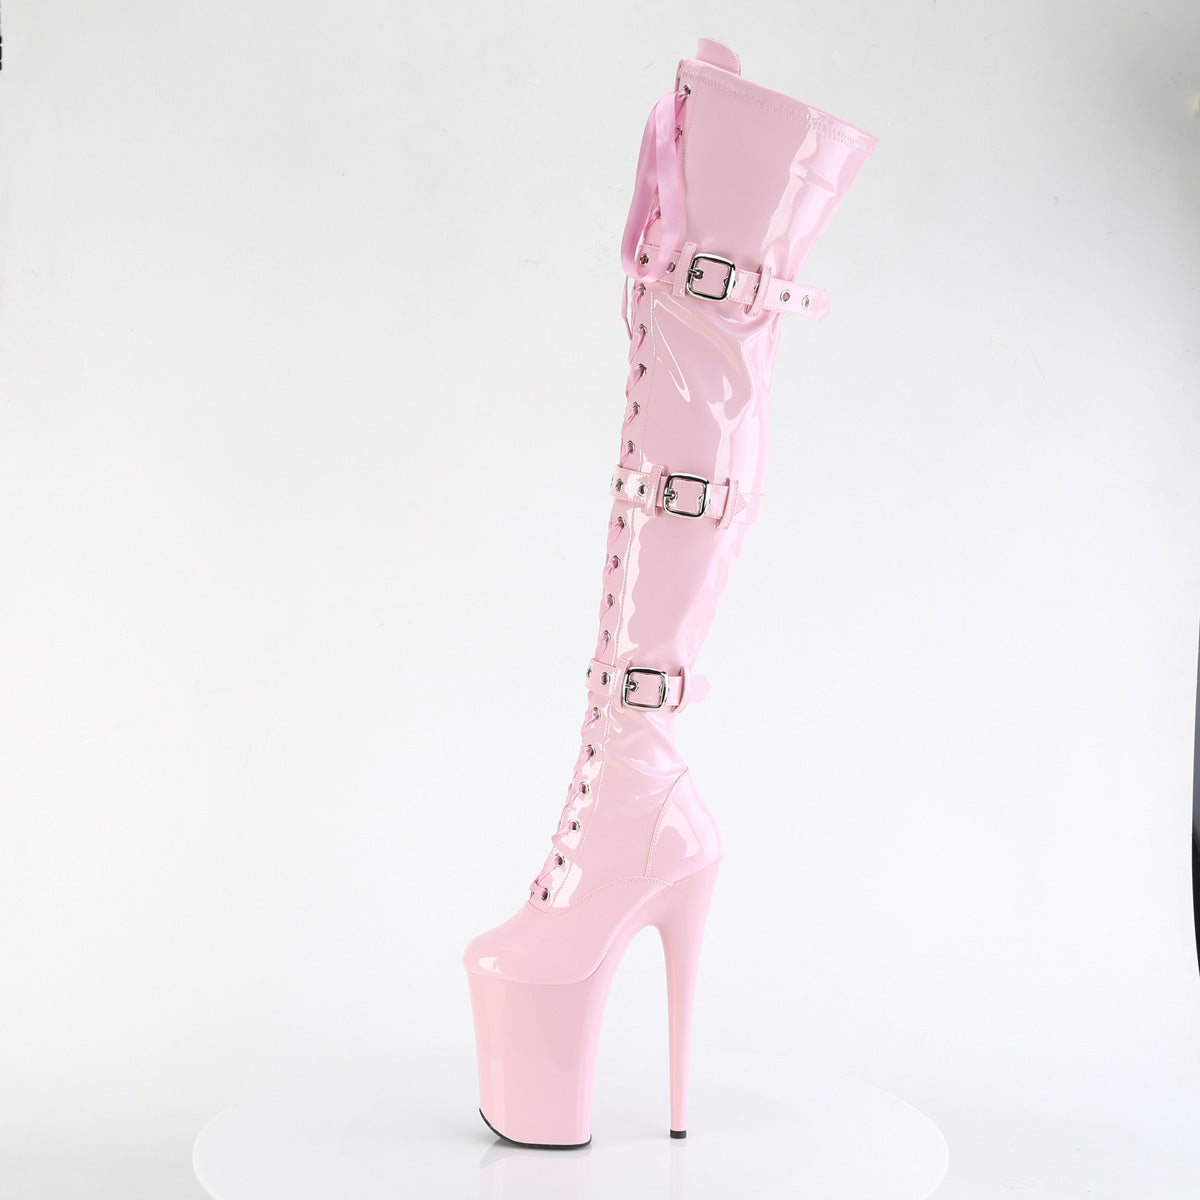 INFINITY-3028 Pleaser B Pink Stretch Patent/B Pink Platform Shoes [Thigh High Boots]